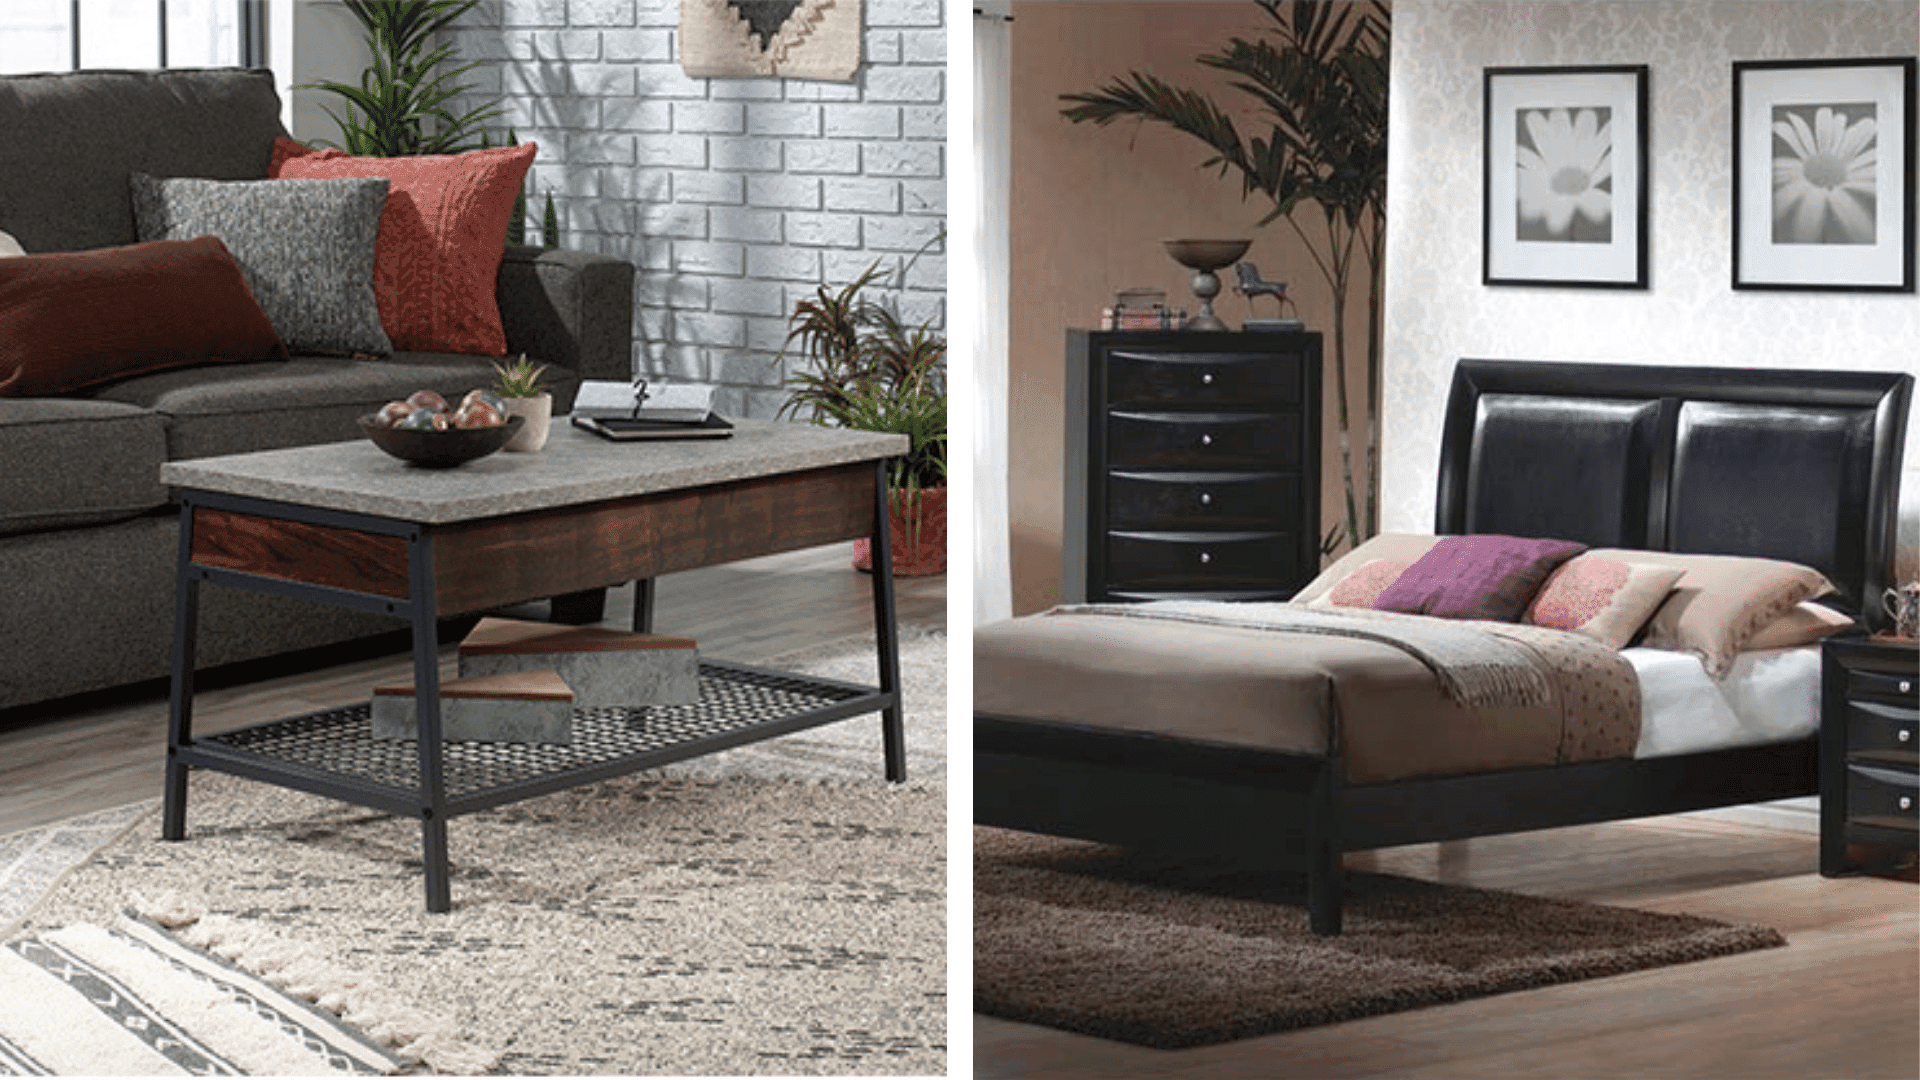 Two images side-by-side. One shows a wood and metal coffee table in front of a grey couch. The other shows a dark brown bedframe, chest of drawers, & nightstand